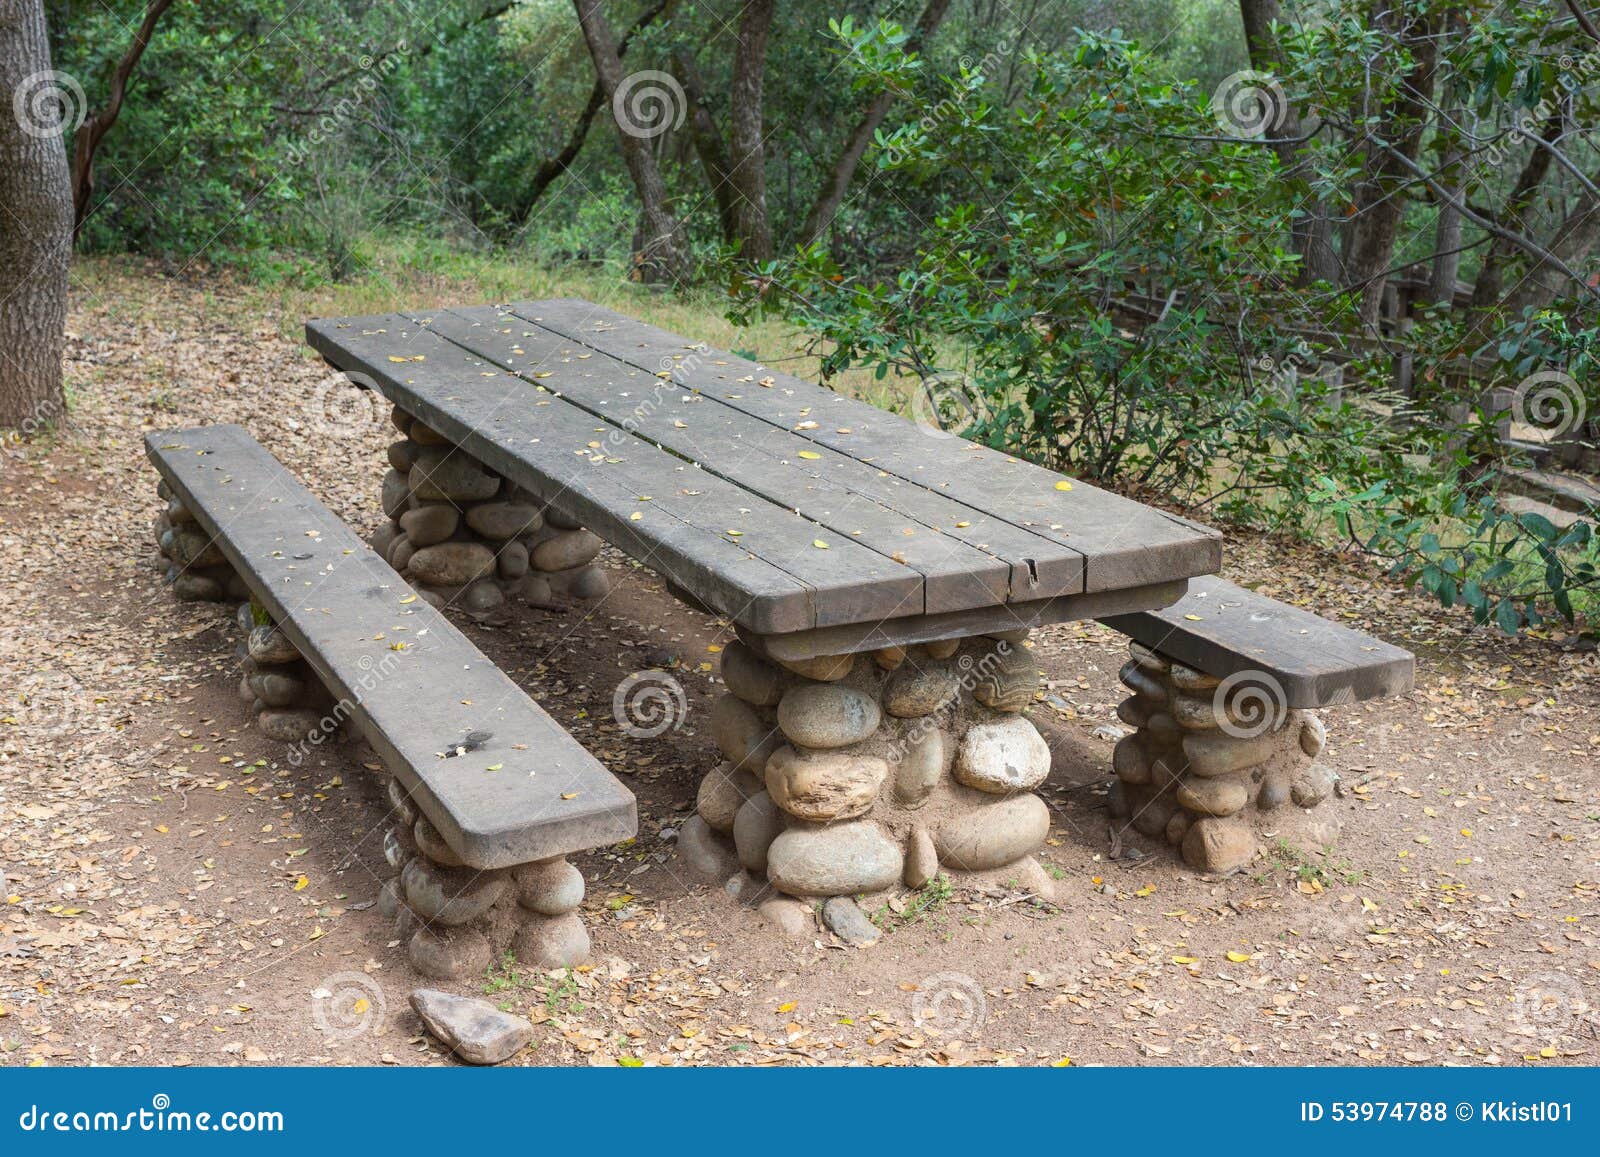 State Park Picnic Table Stock Photo - Image: 53974788